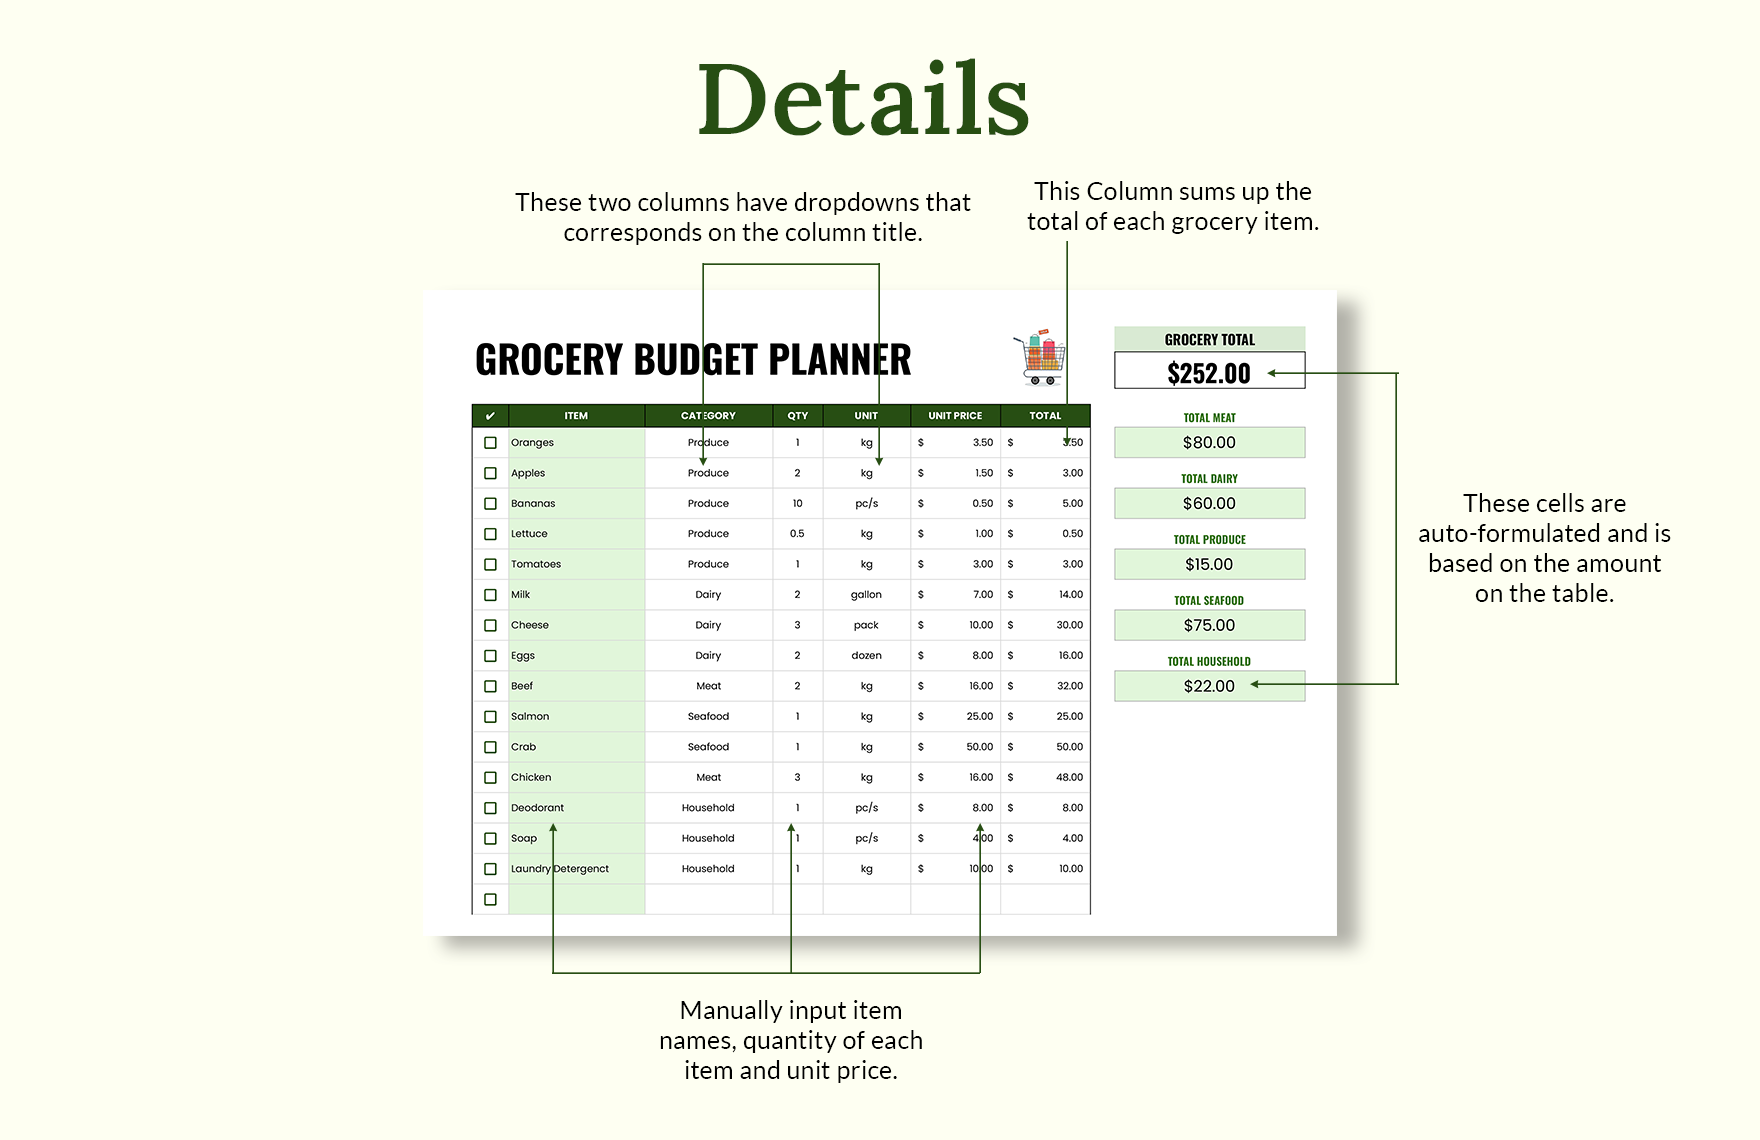 Grocery Budget Planner Template